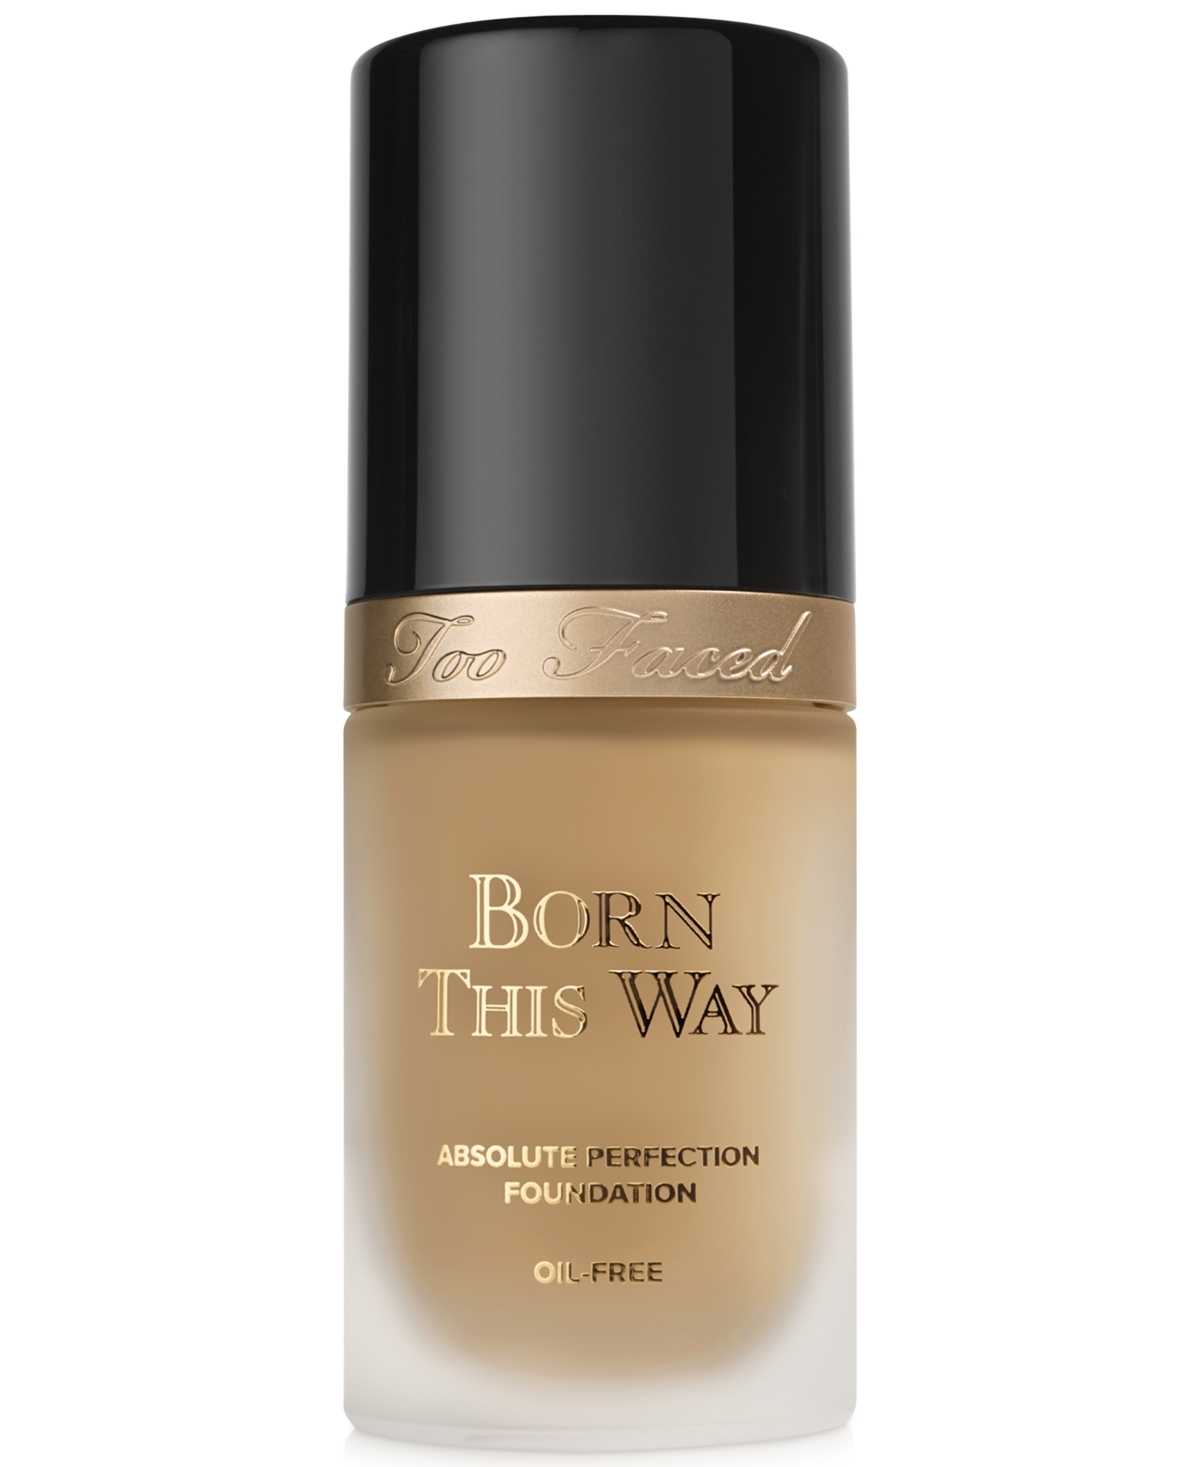 Too Faced Born This Way Flawless Coverage Natural Finish Foundation In Warm Beige - Medium W,neutral Undertones